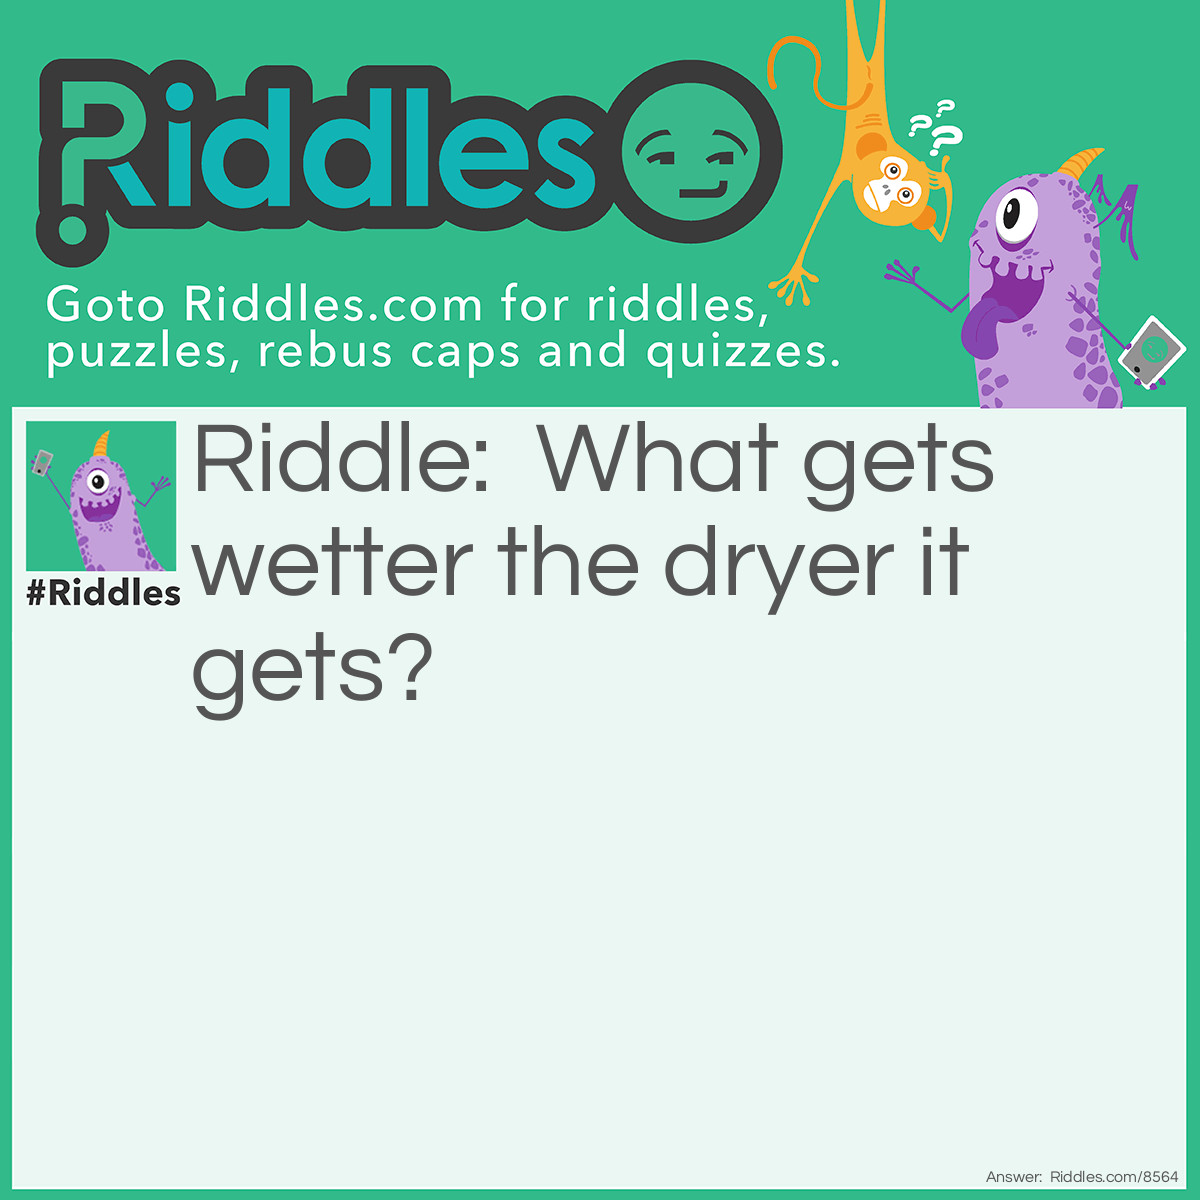 Riddle: What gets wetter the dryer it gets? Answer: A towel!